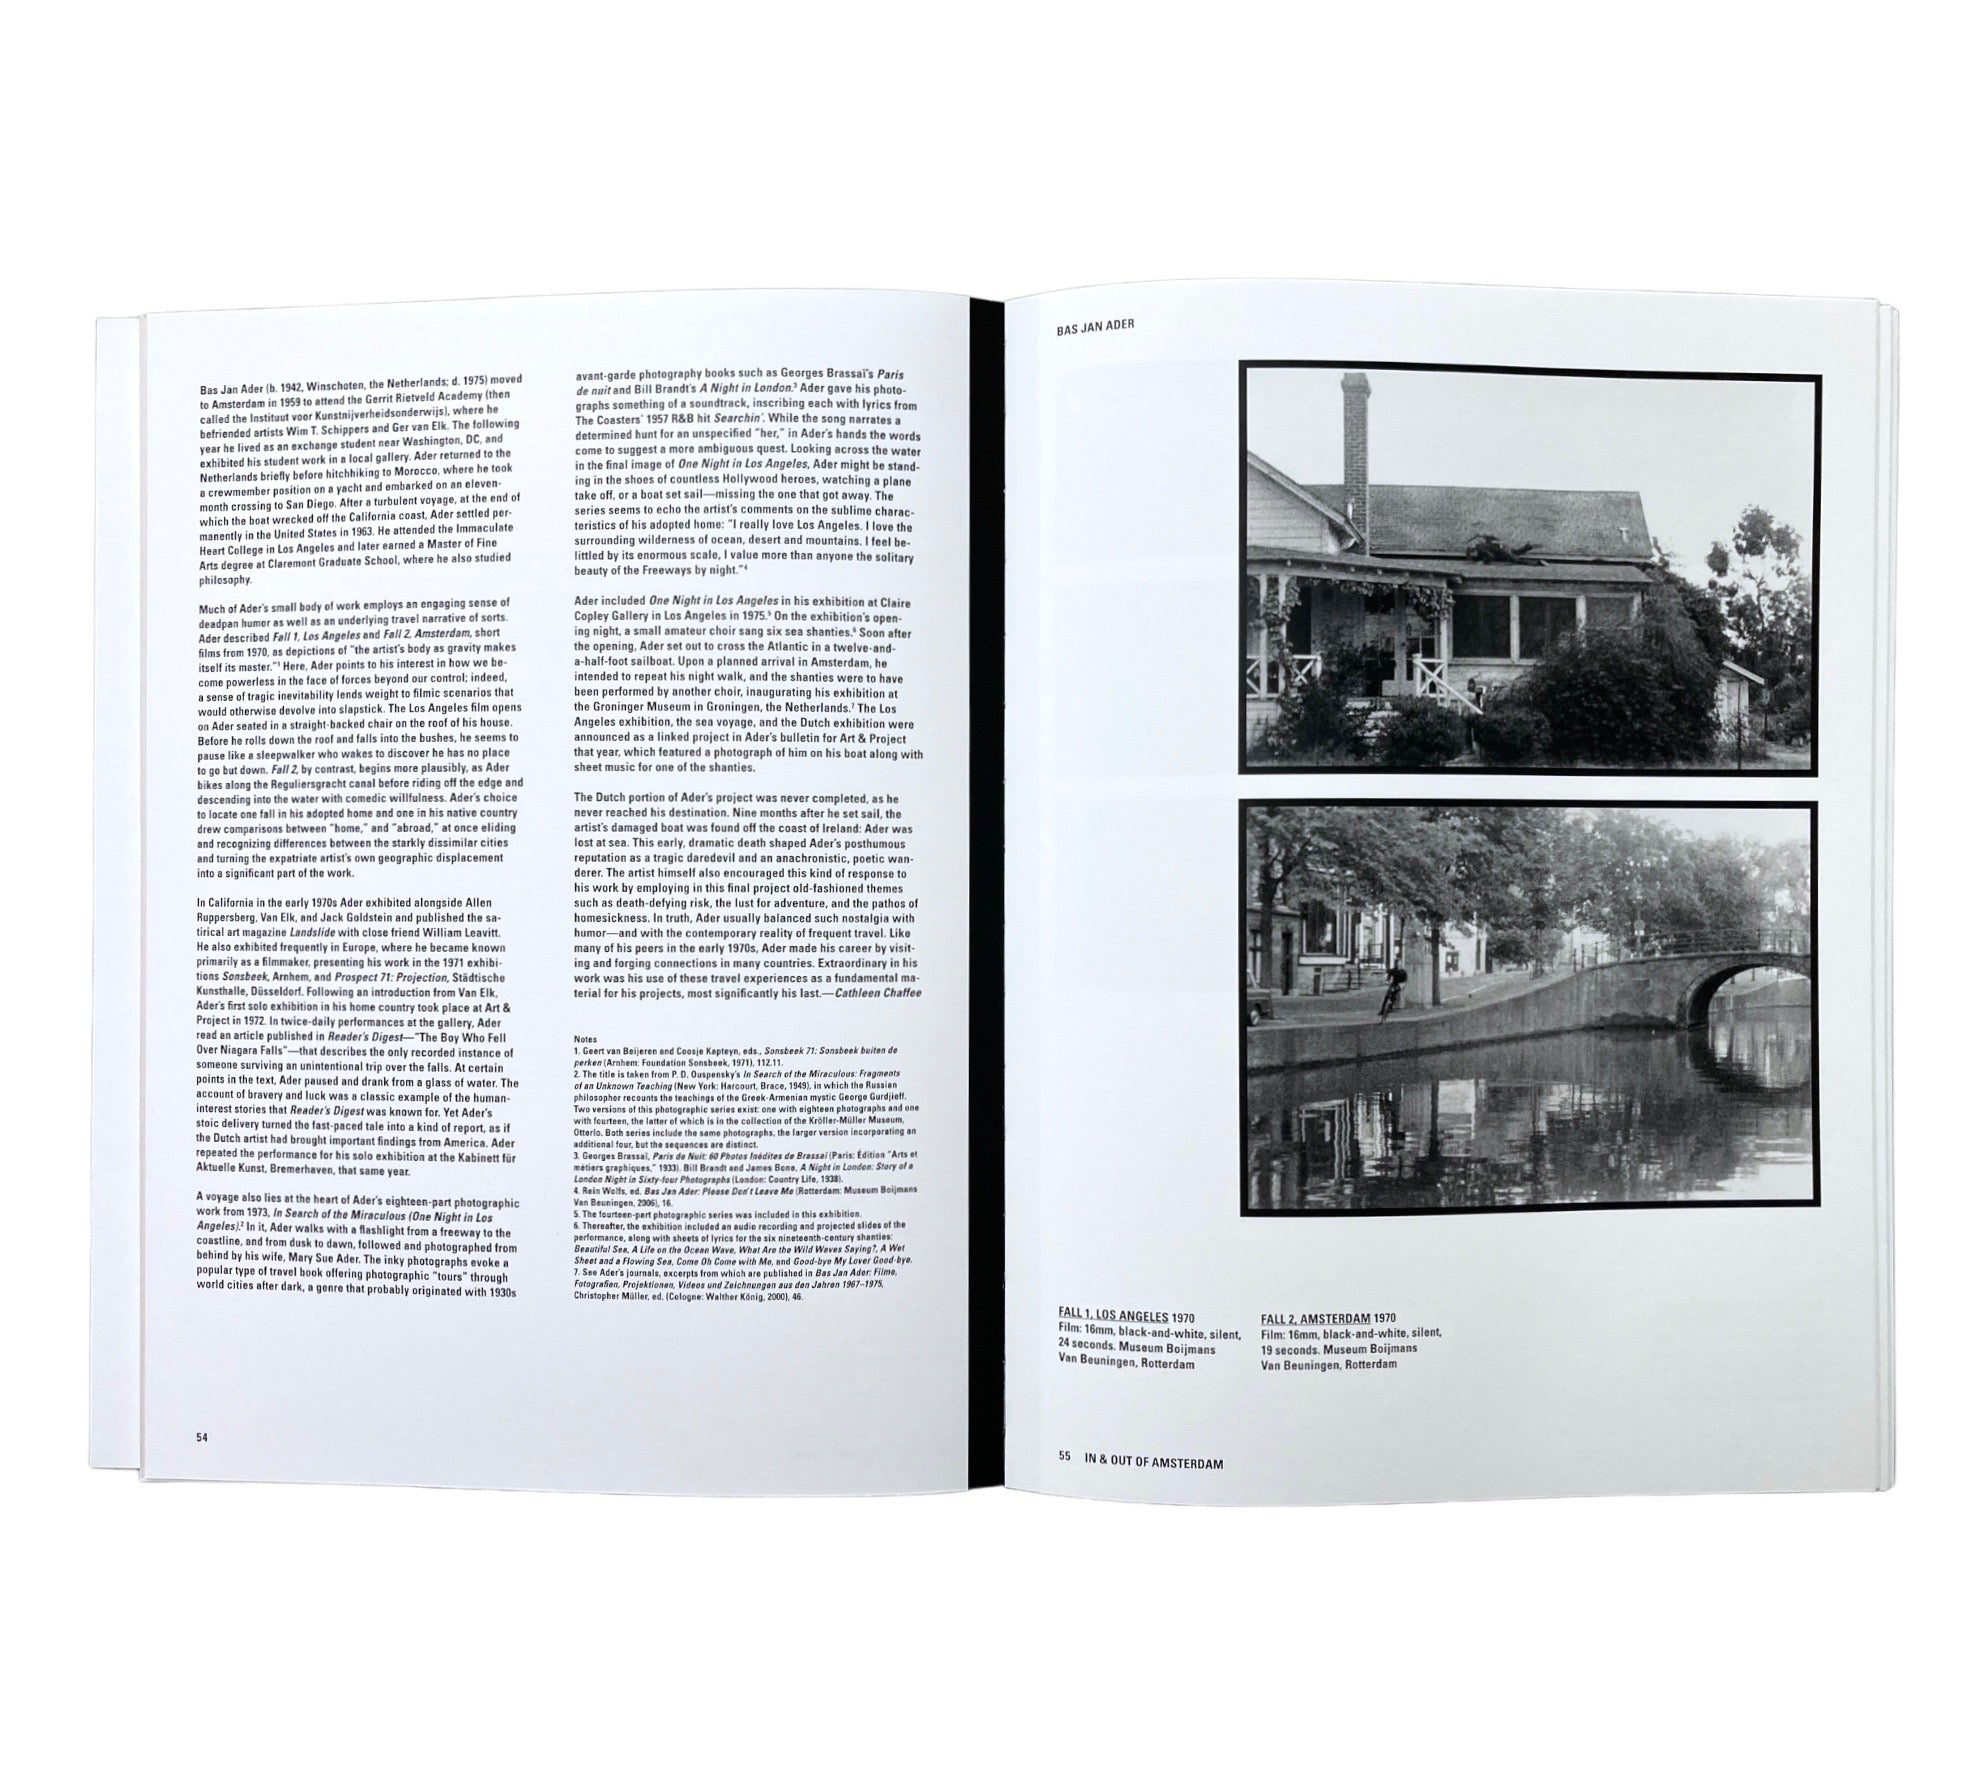 In & Out of Amsterdam: Travels in Conceptual Art, 1960-1976 (Non-mint)